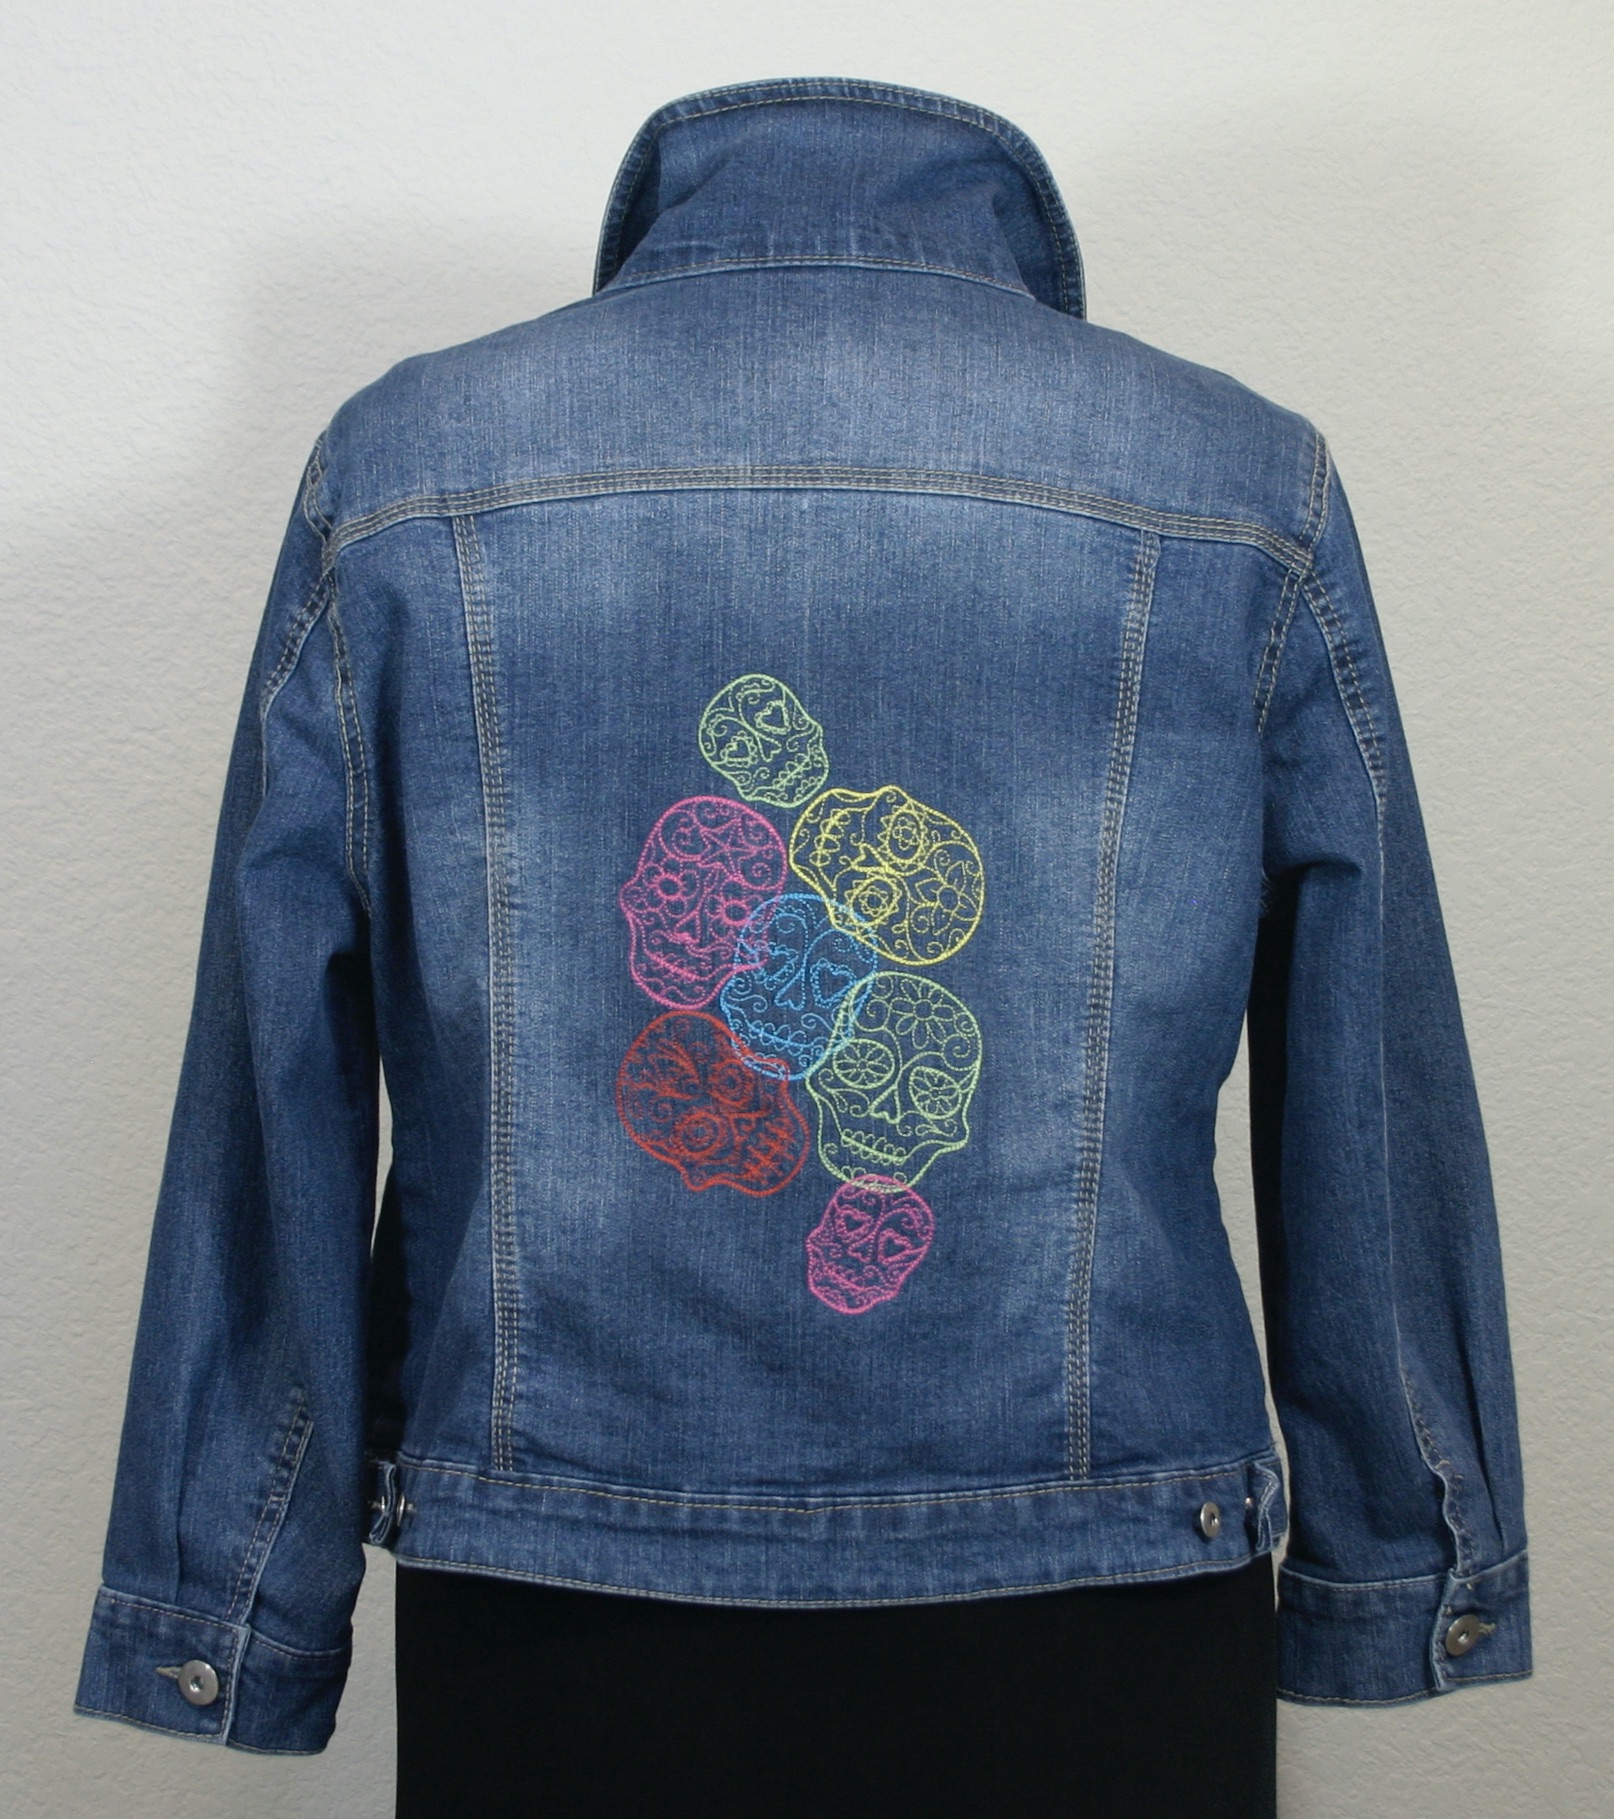 A denim jacket with a colorful embroidered design.